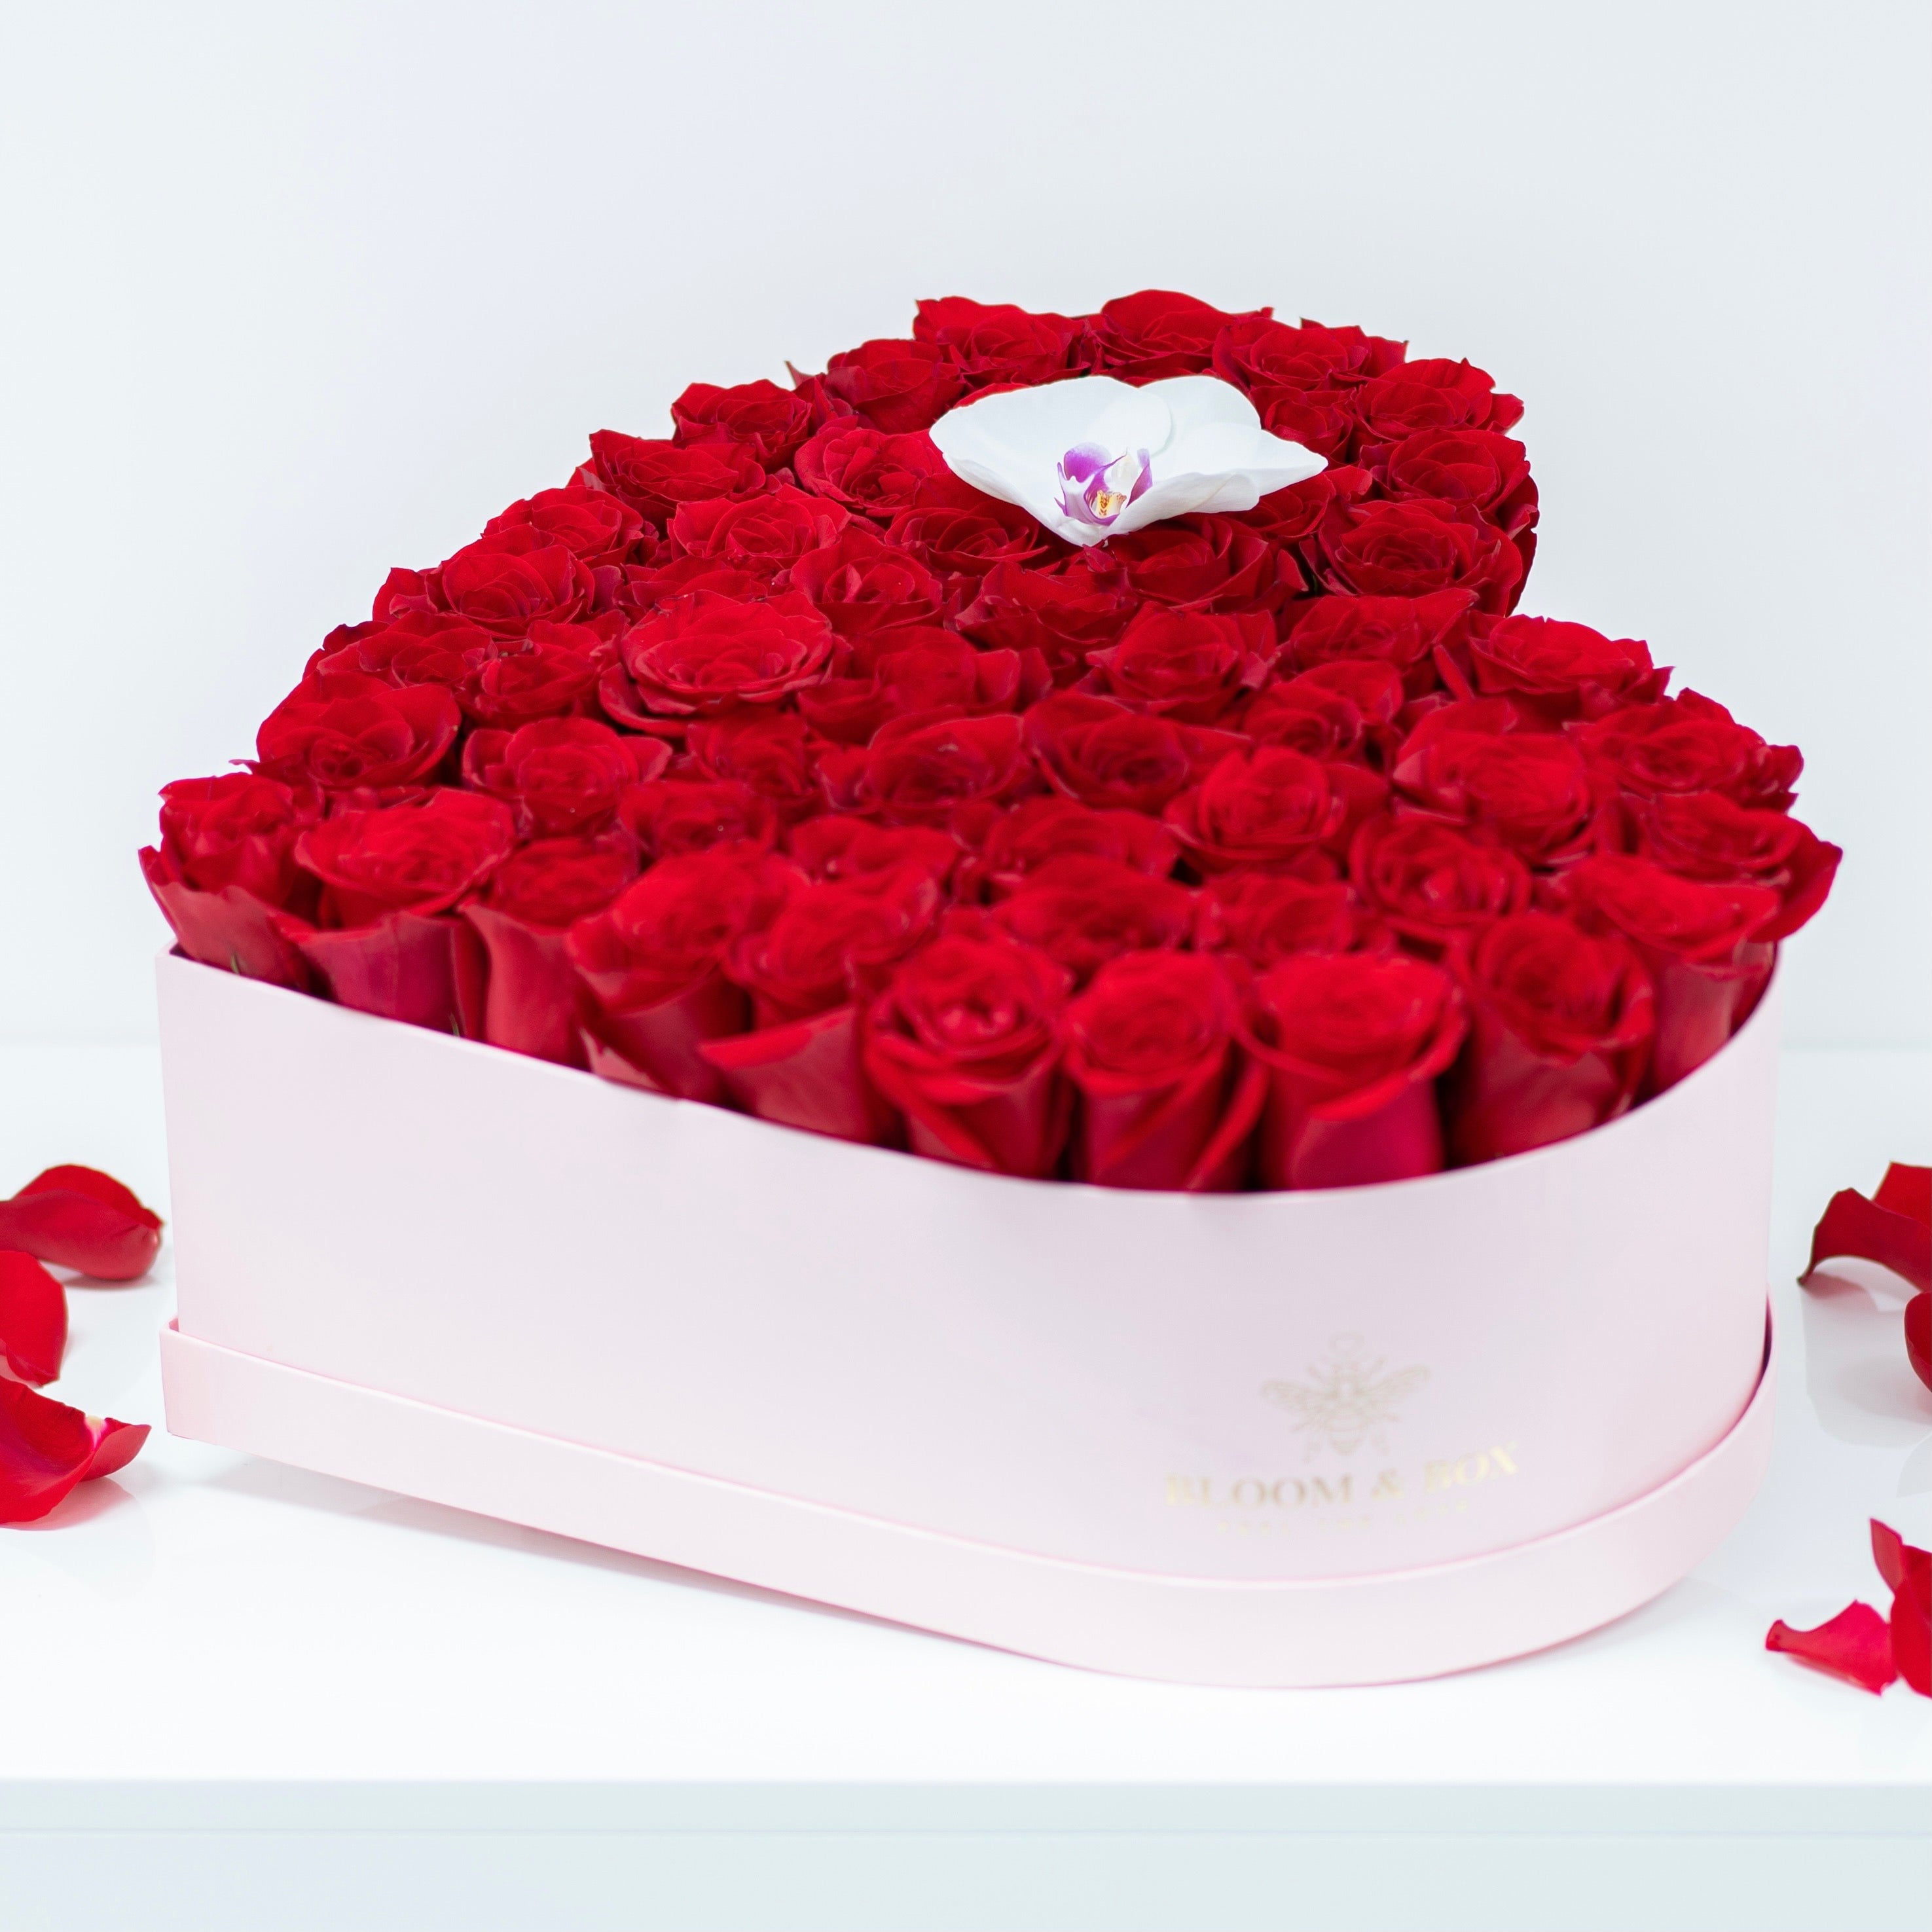 Heart-Shaped box with Red Roses SALE